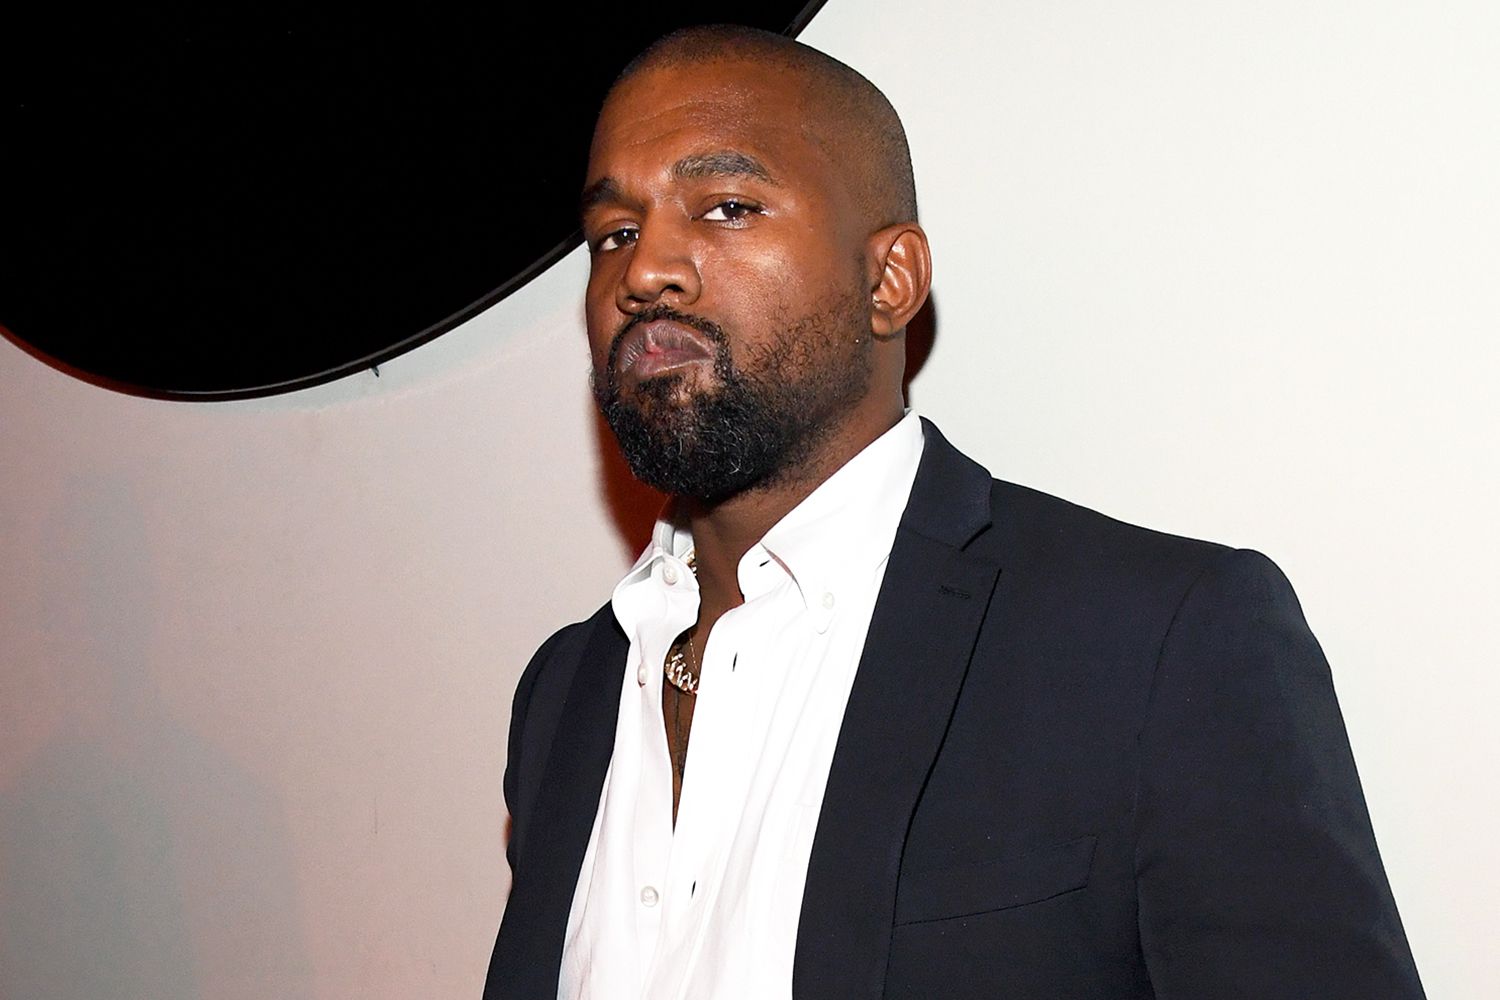 kanye-west-abruptly-ends-pedicure-tells-nail-tech-its-my-toes